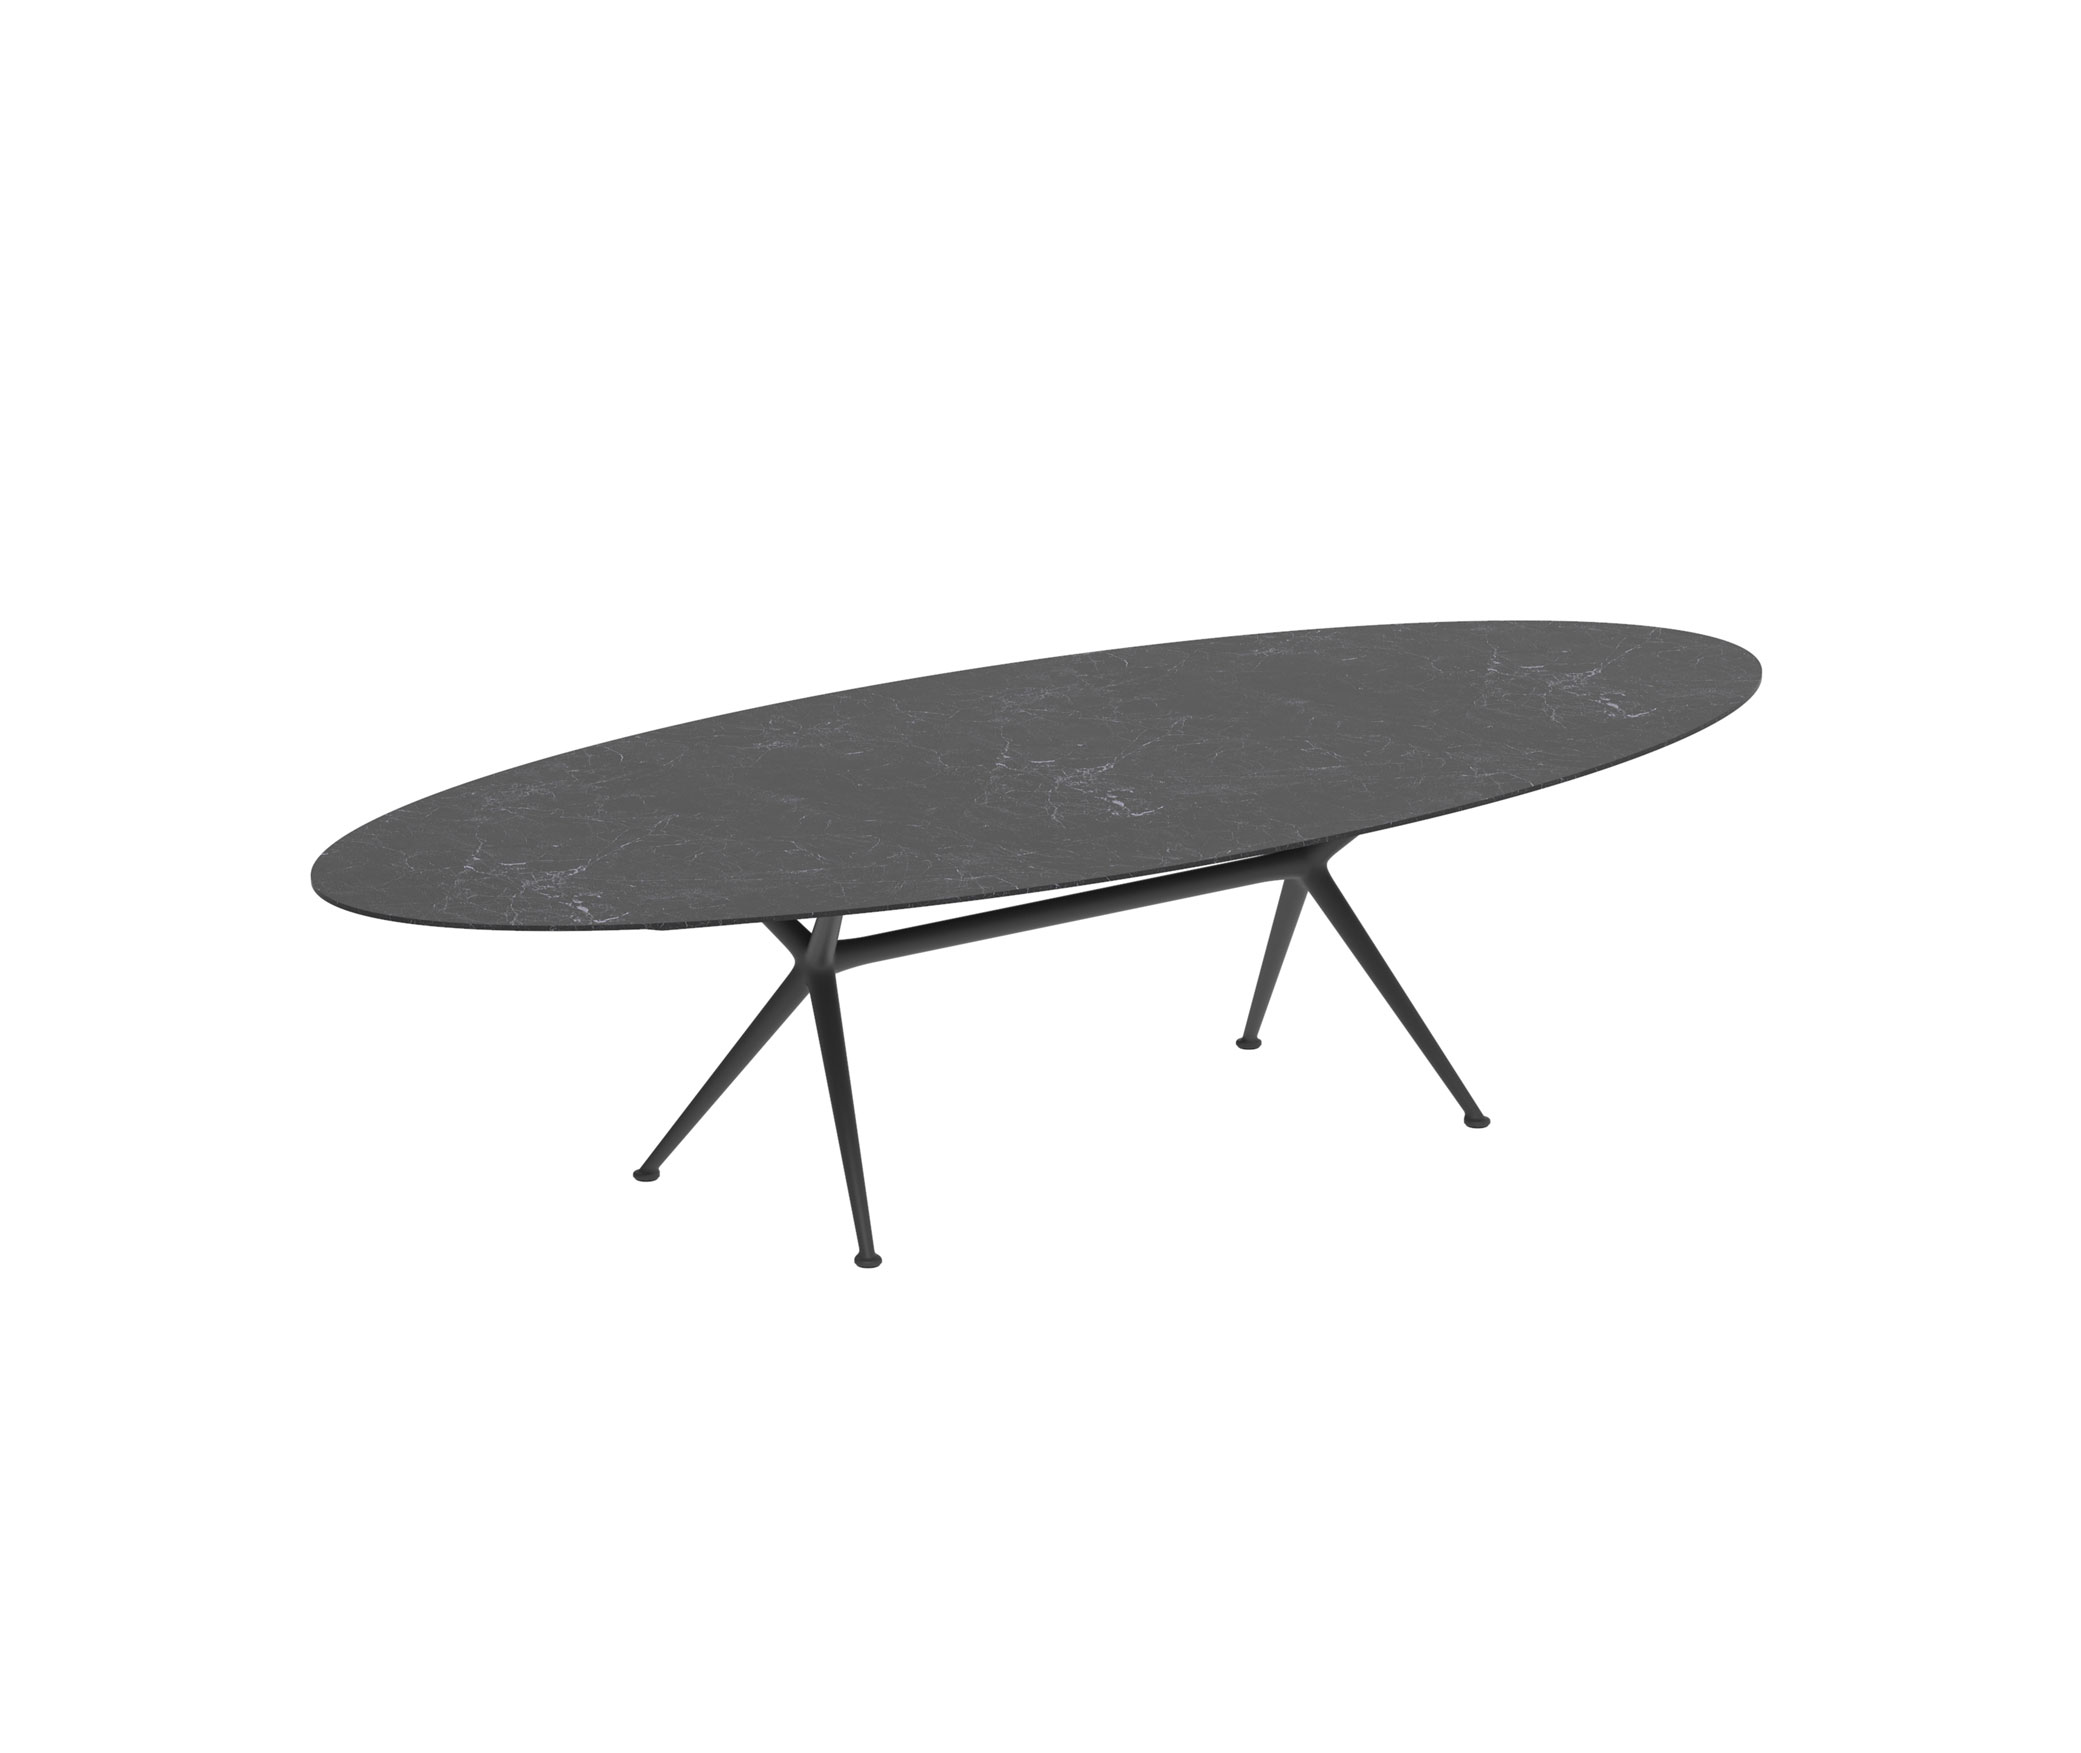 Royal-Botania_Exes-Ellipse-Table_int_products